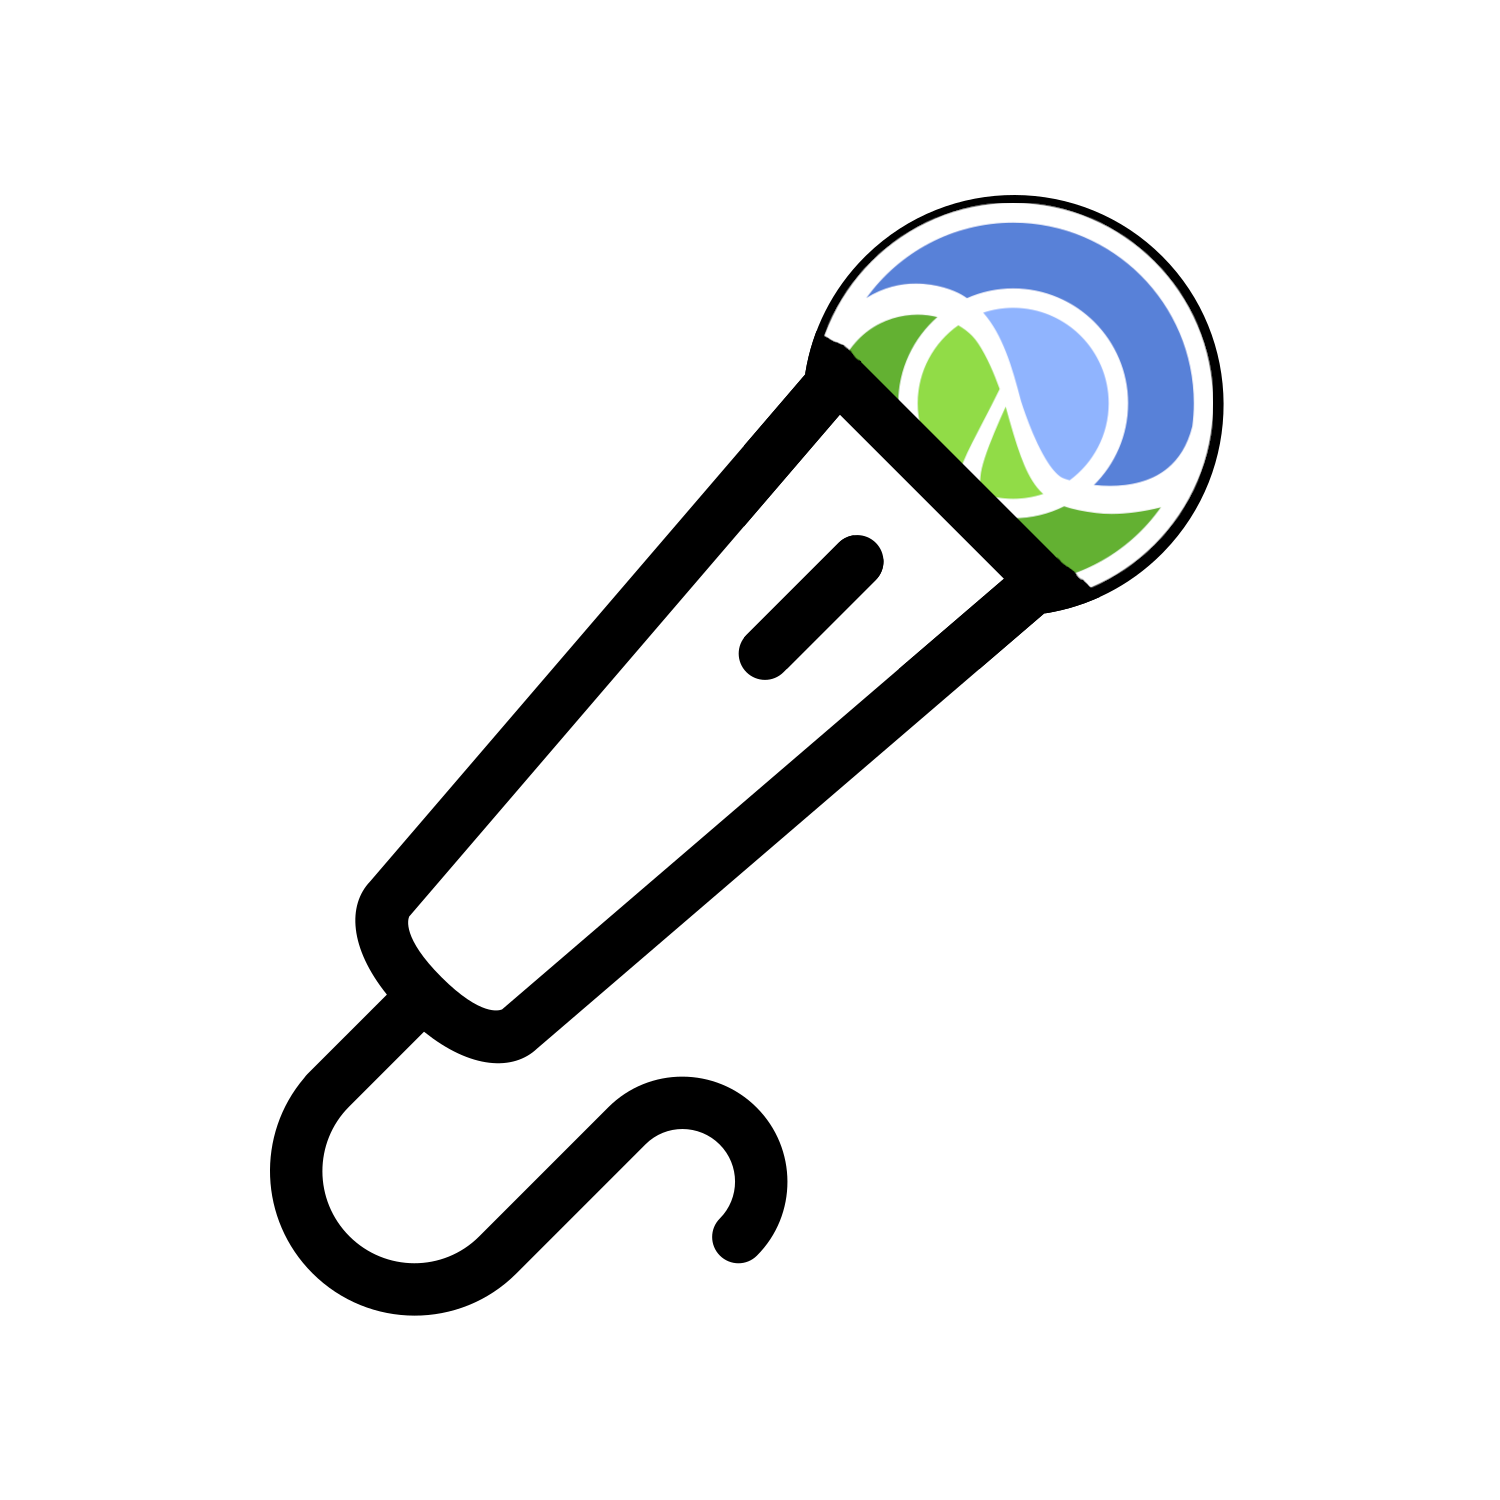 A microphone with the Clojure logo for the top part